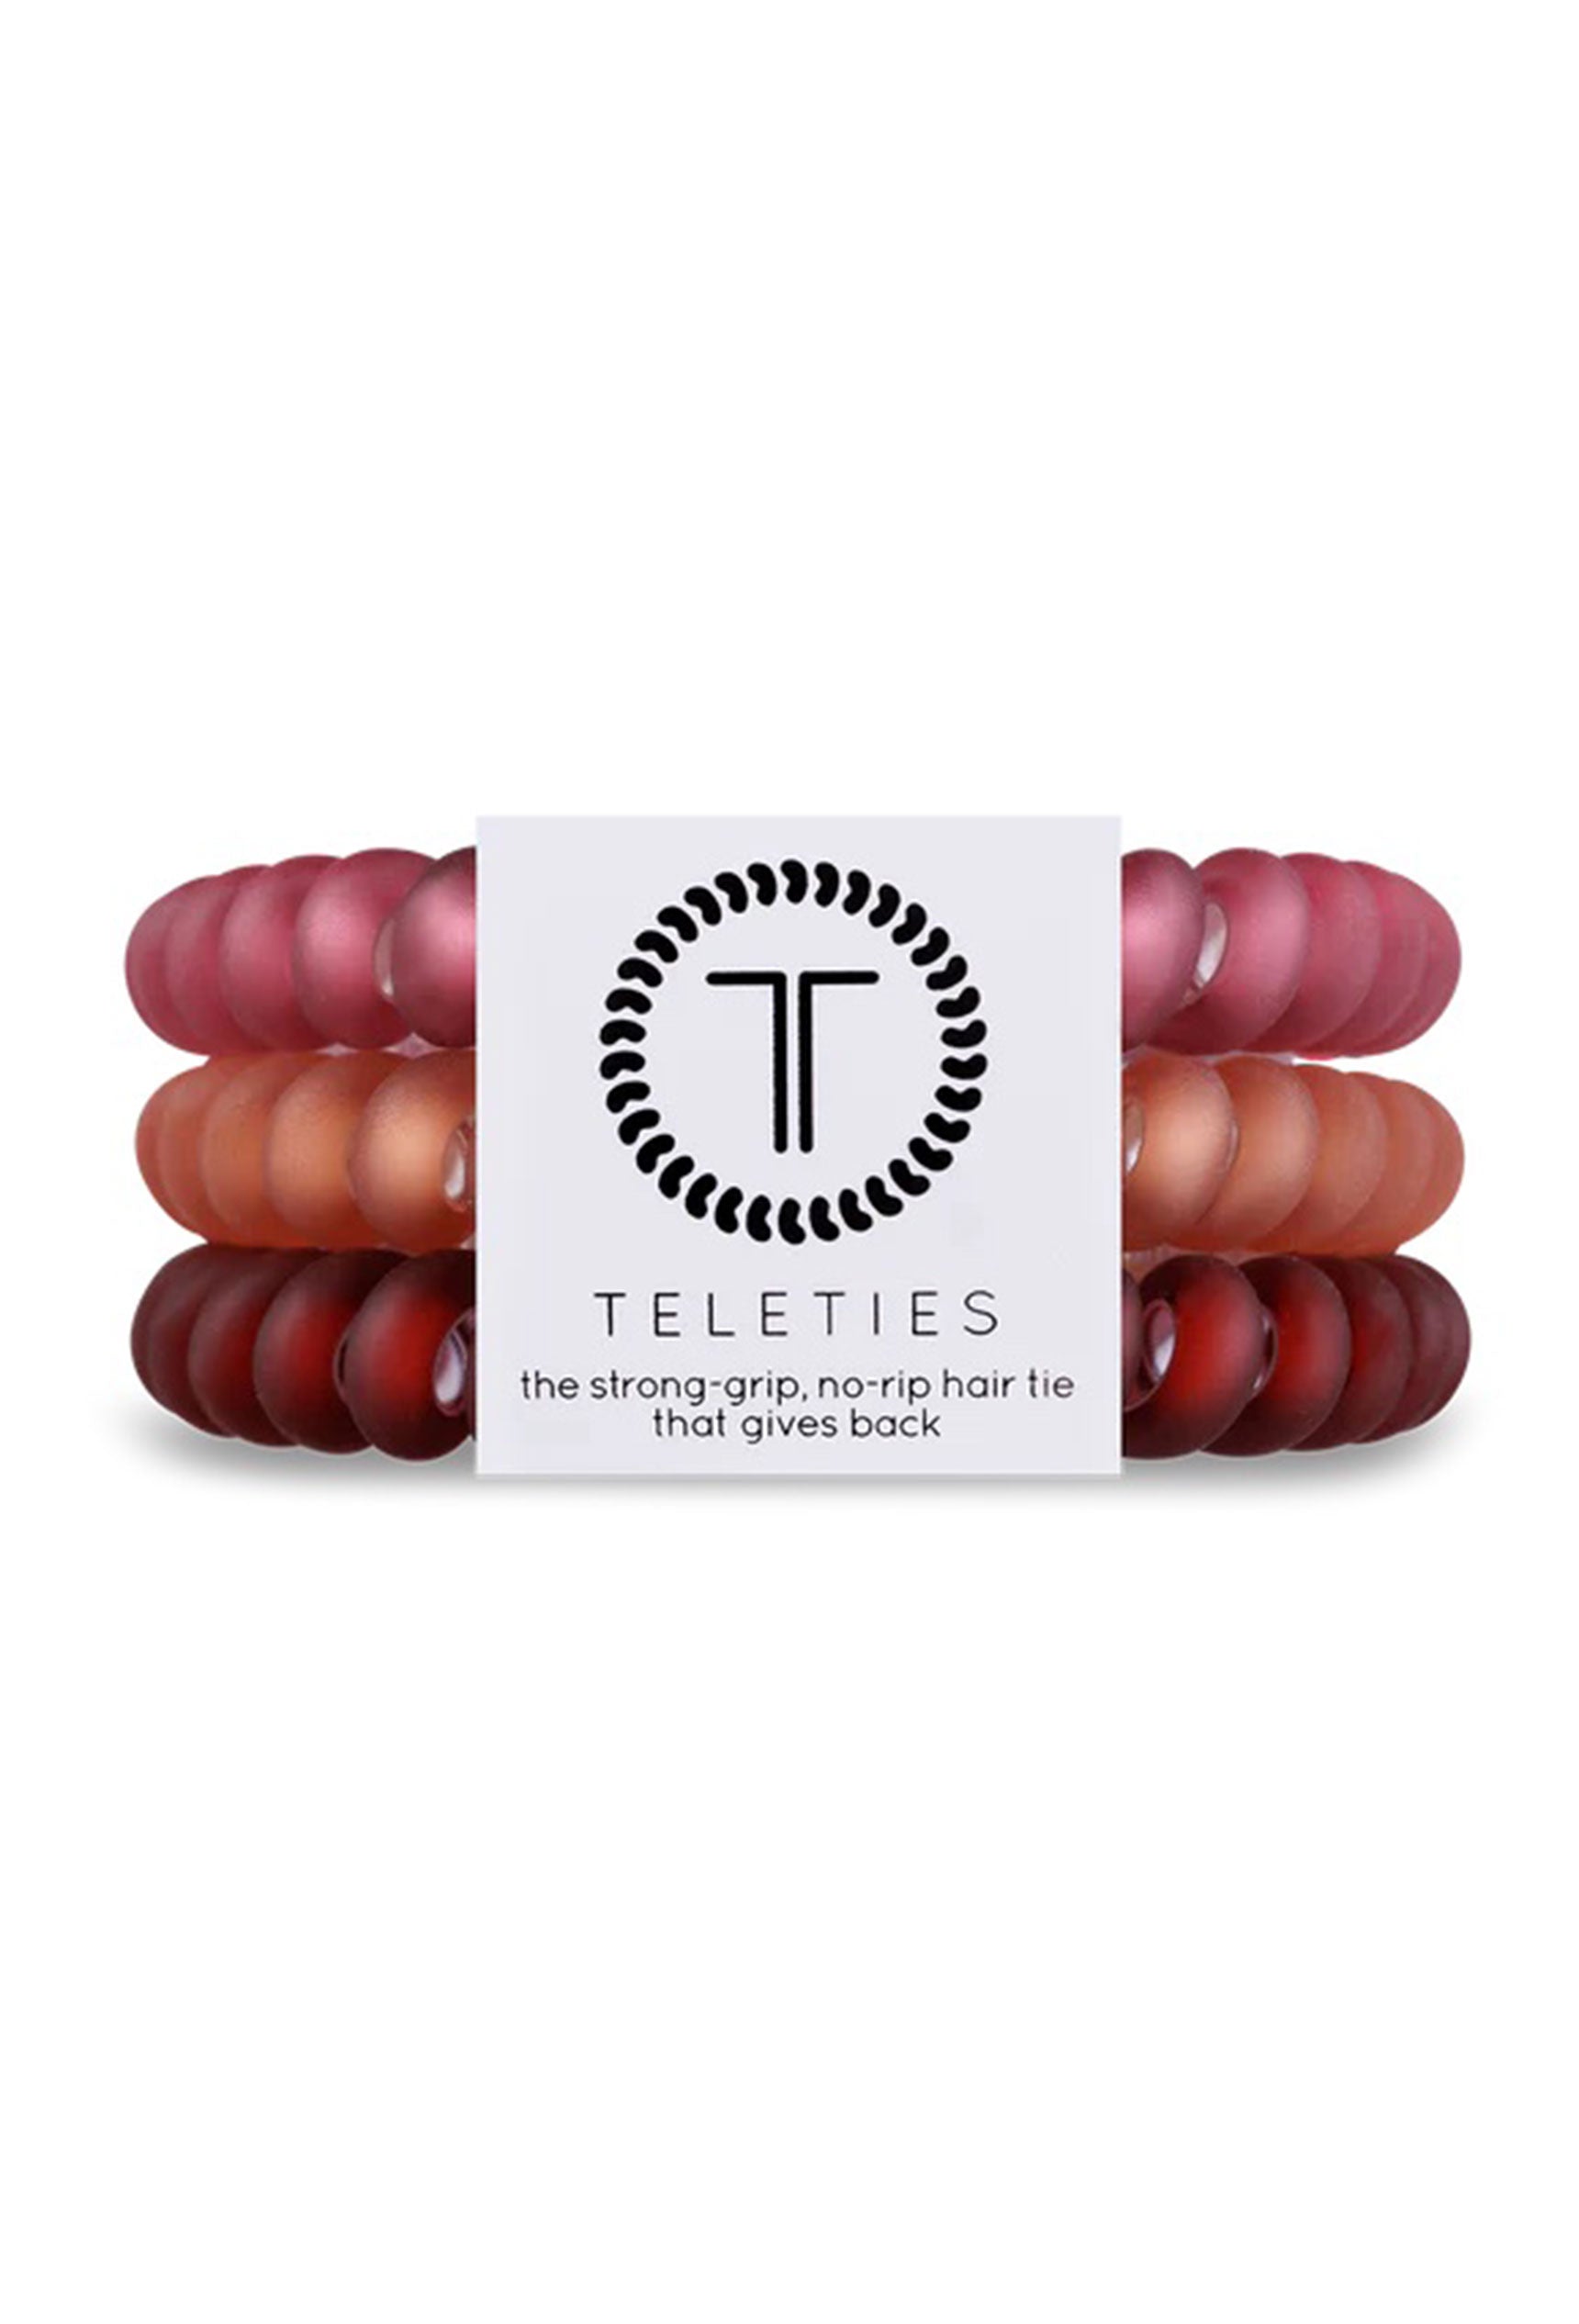 TELETIES Small Hair Ties - Spicy, set of 3, coil style hair ties, ombre from red to orange